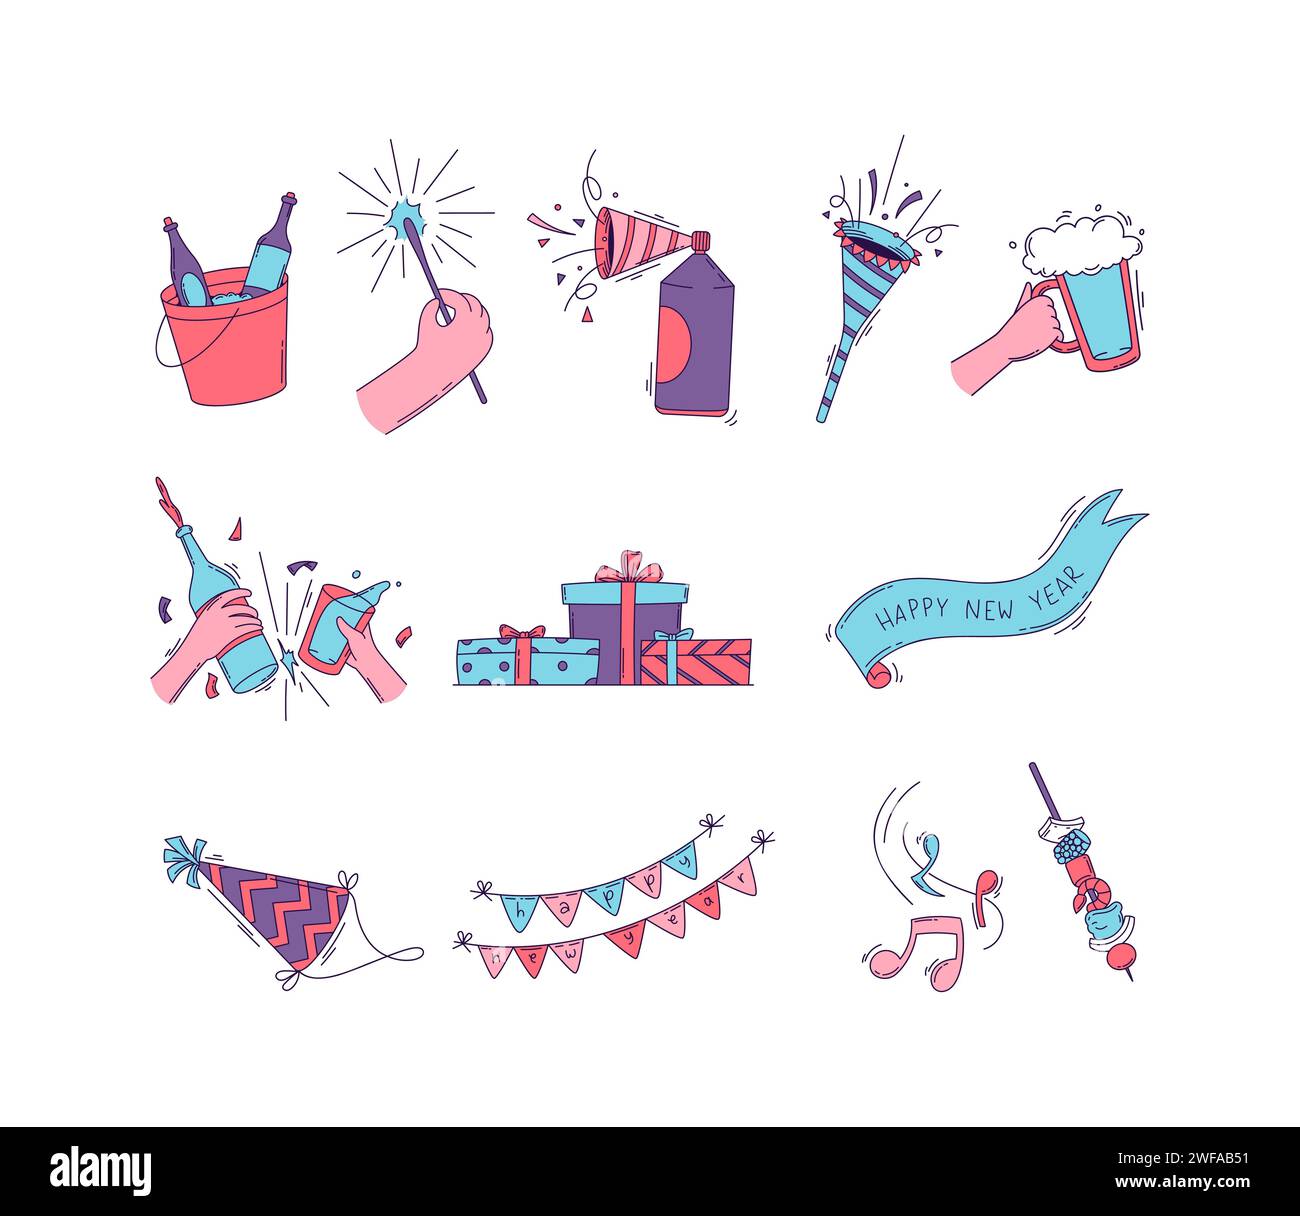 Happy new year party celebration doodle vector set illustration Stock Vector